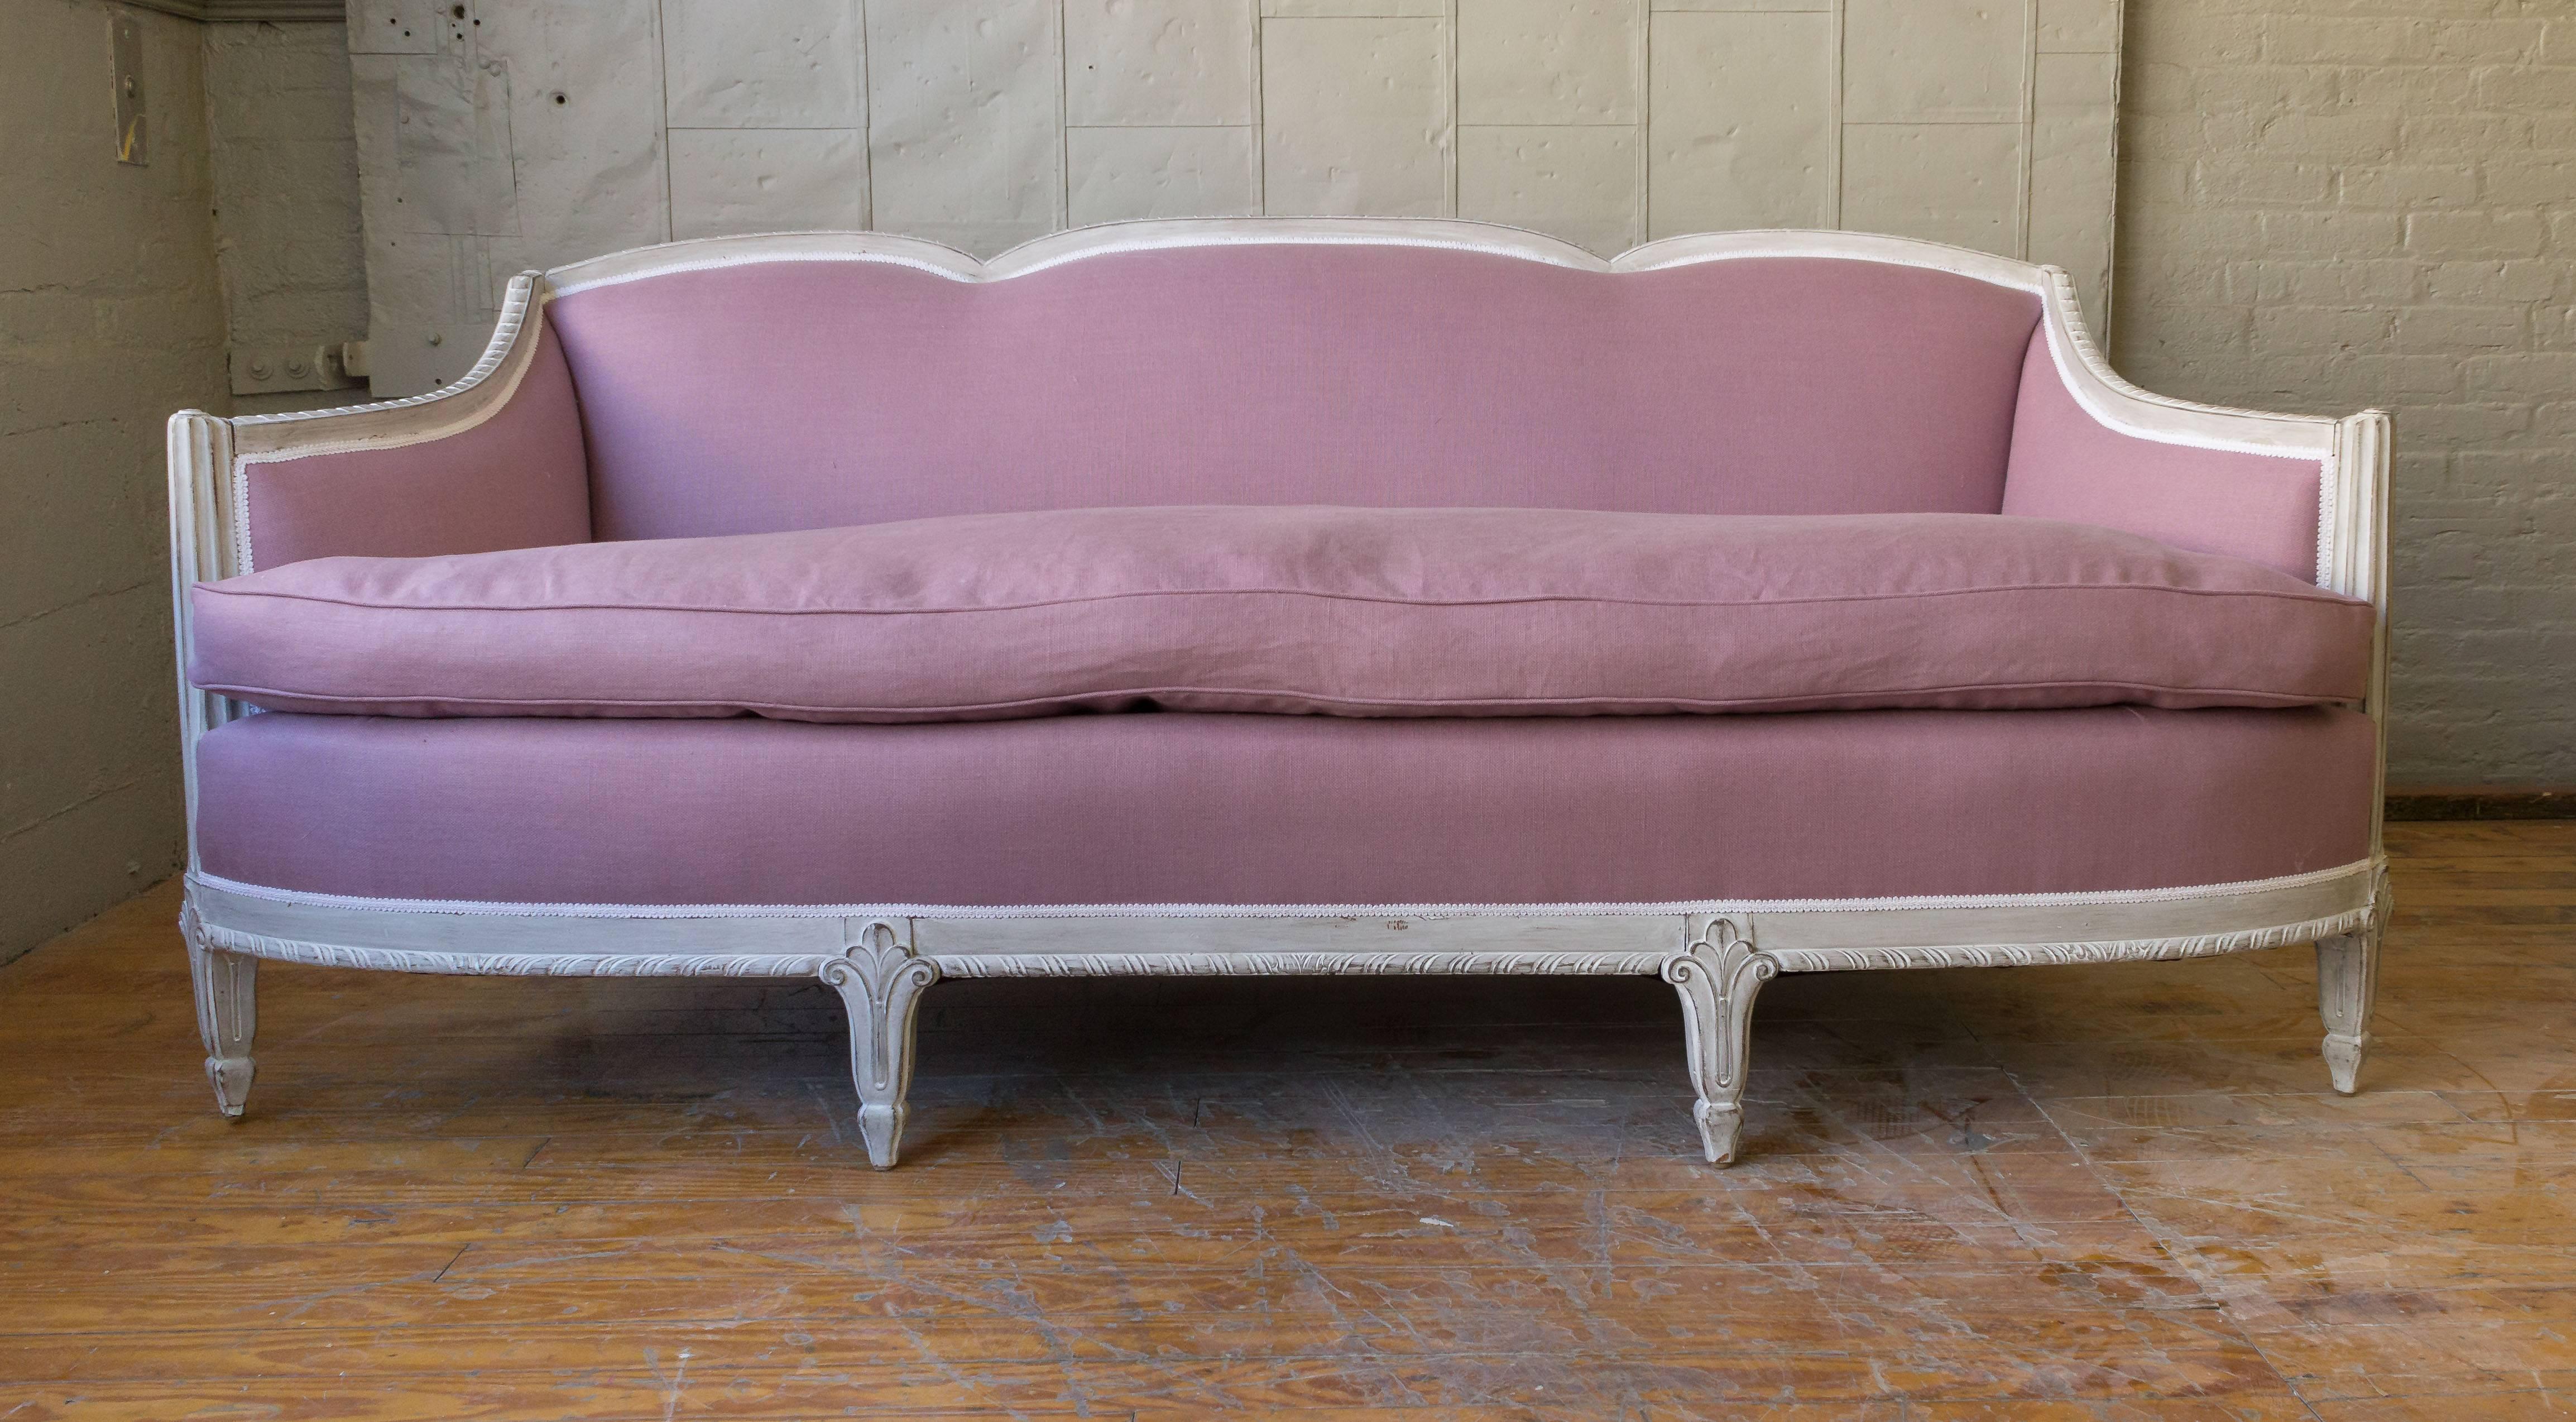 20th Century Art Deco Style Settee Upholstered in Lavender Linen 5